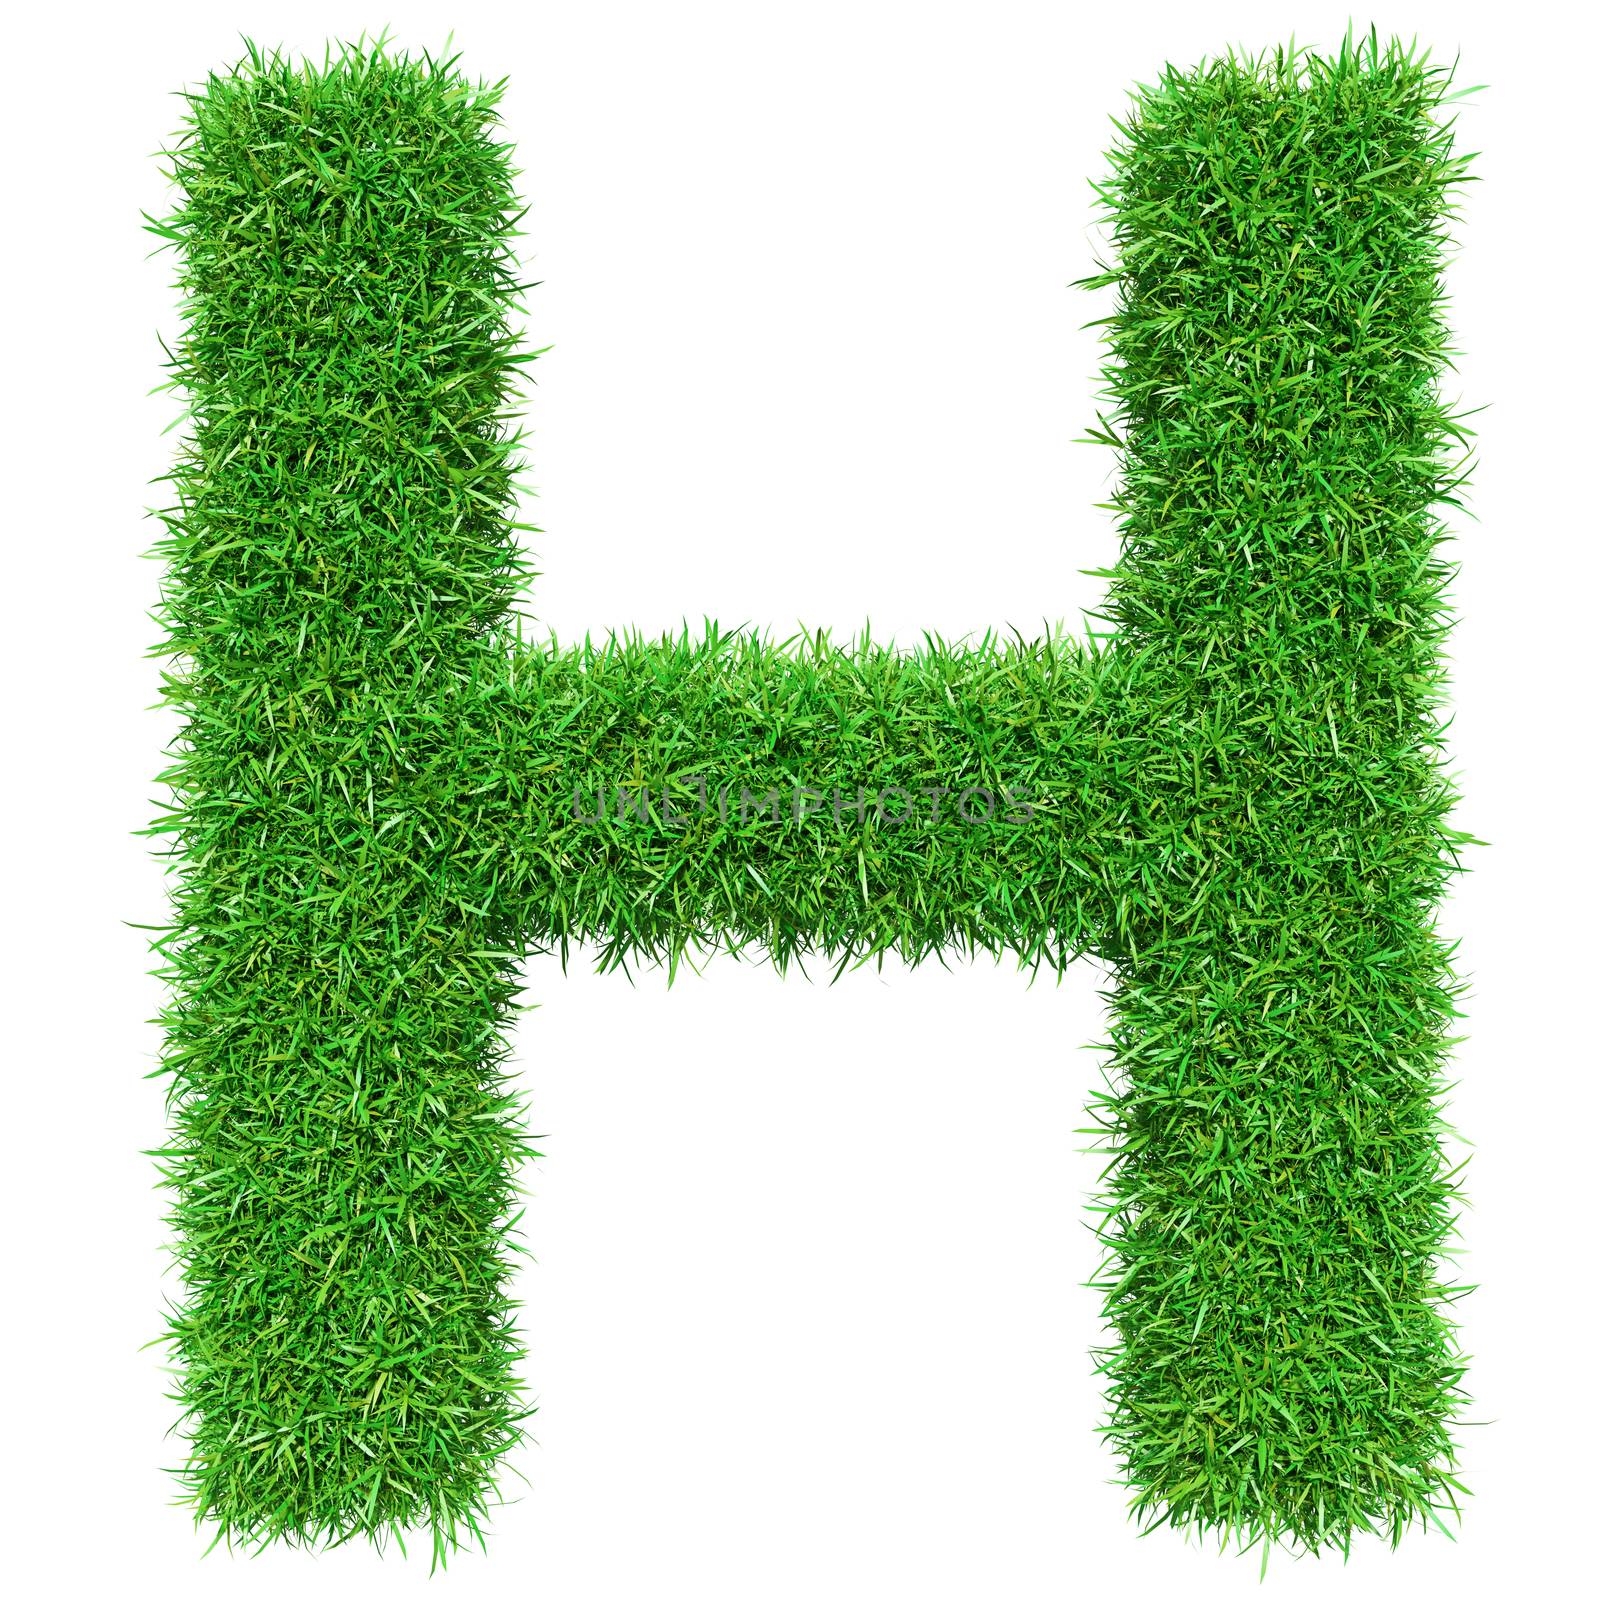 Green Grass Letter H by cherezoff